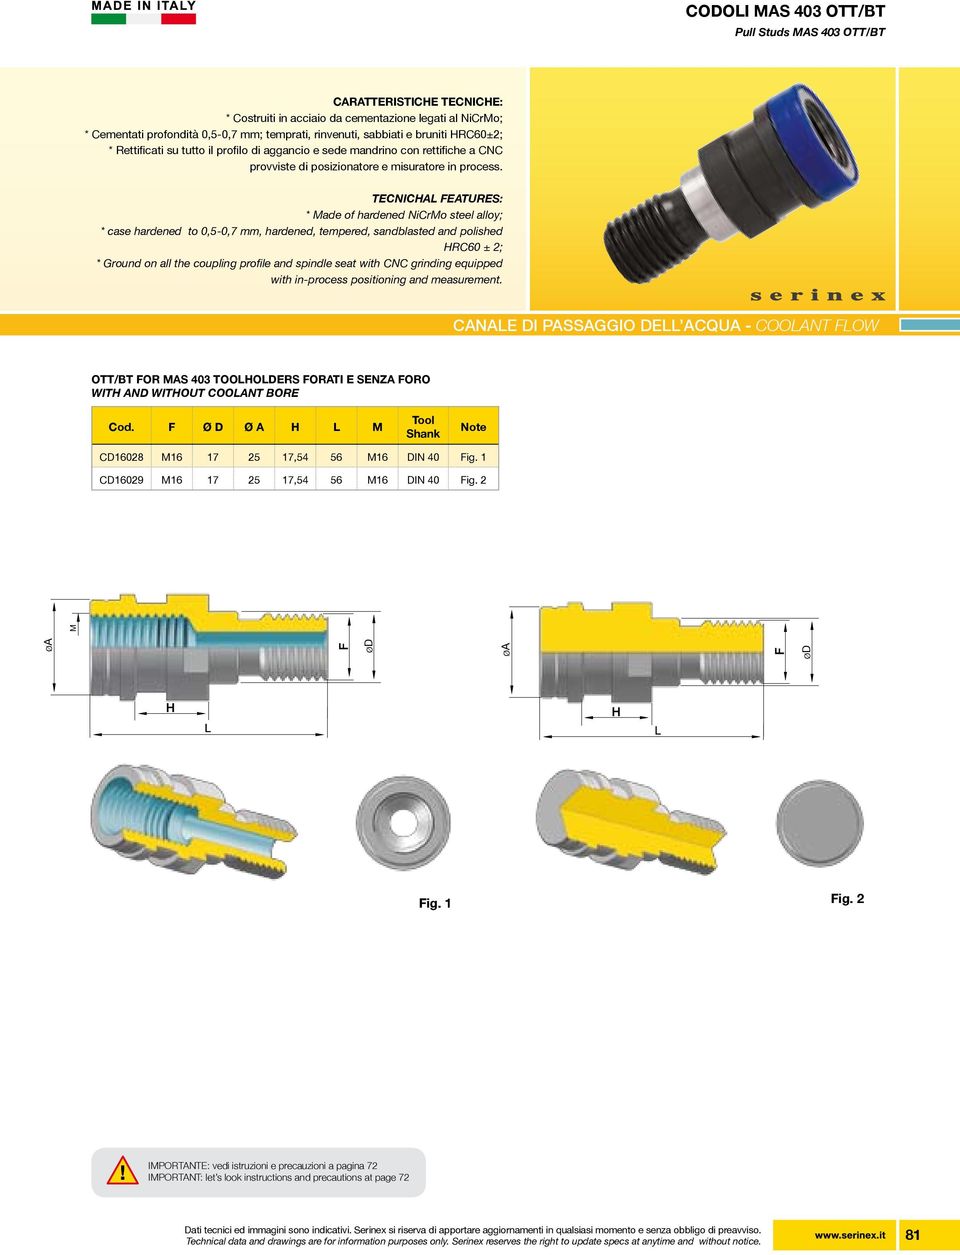 E SENZA FORO WITH AND WITHOUT COOLANT BORE Cod.